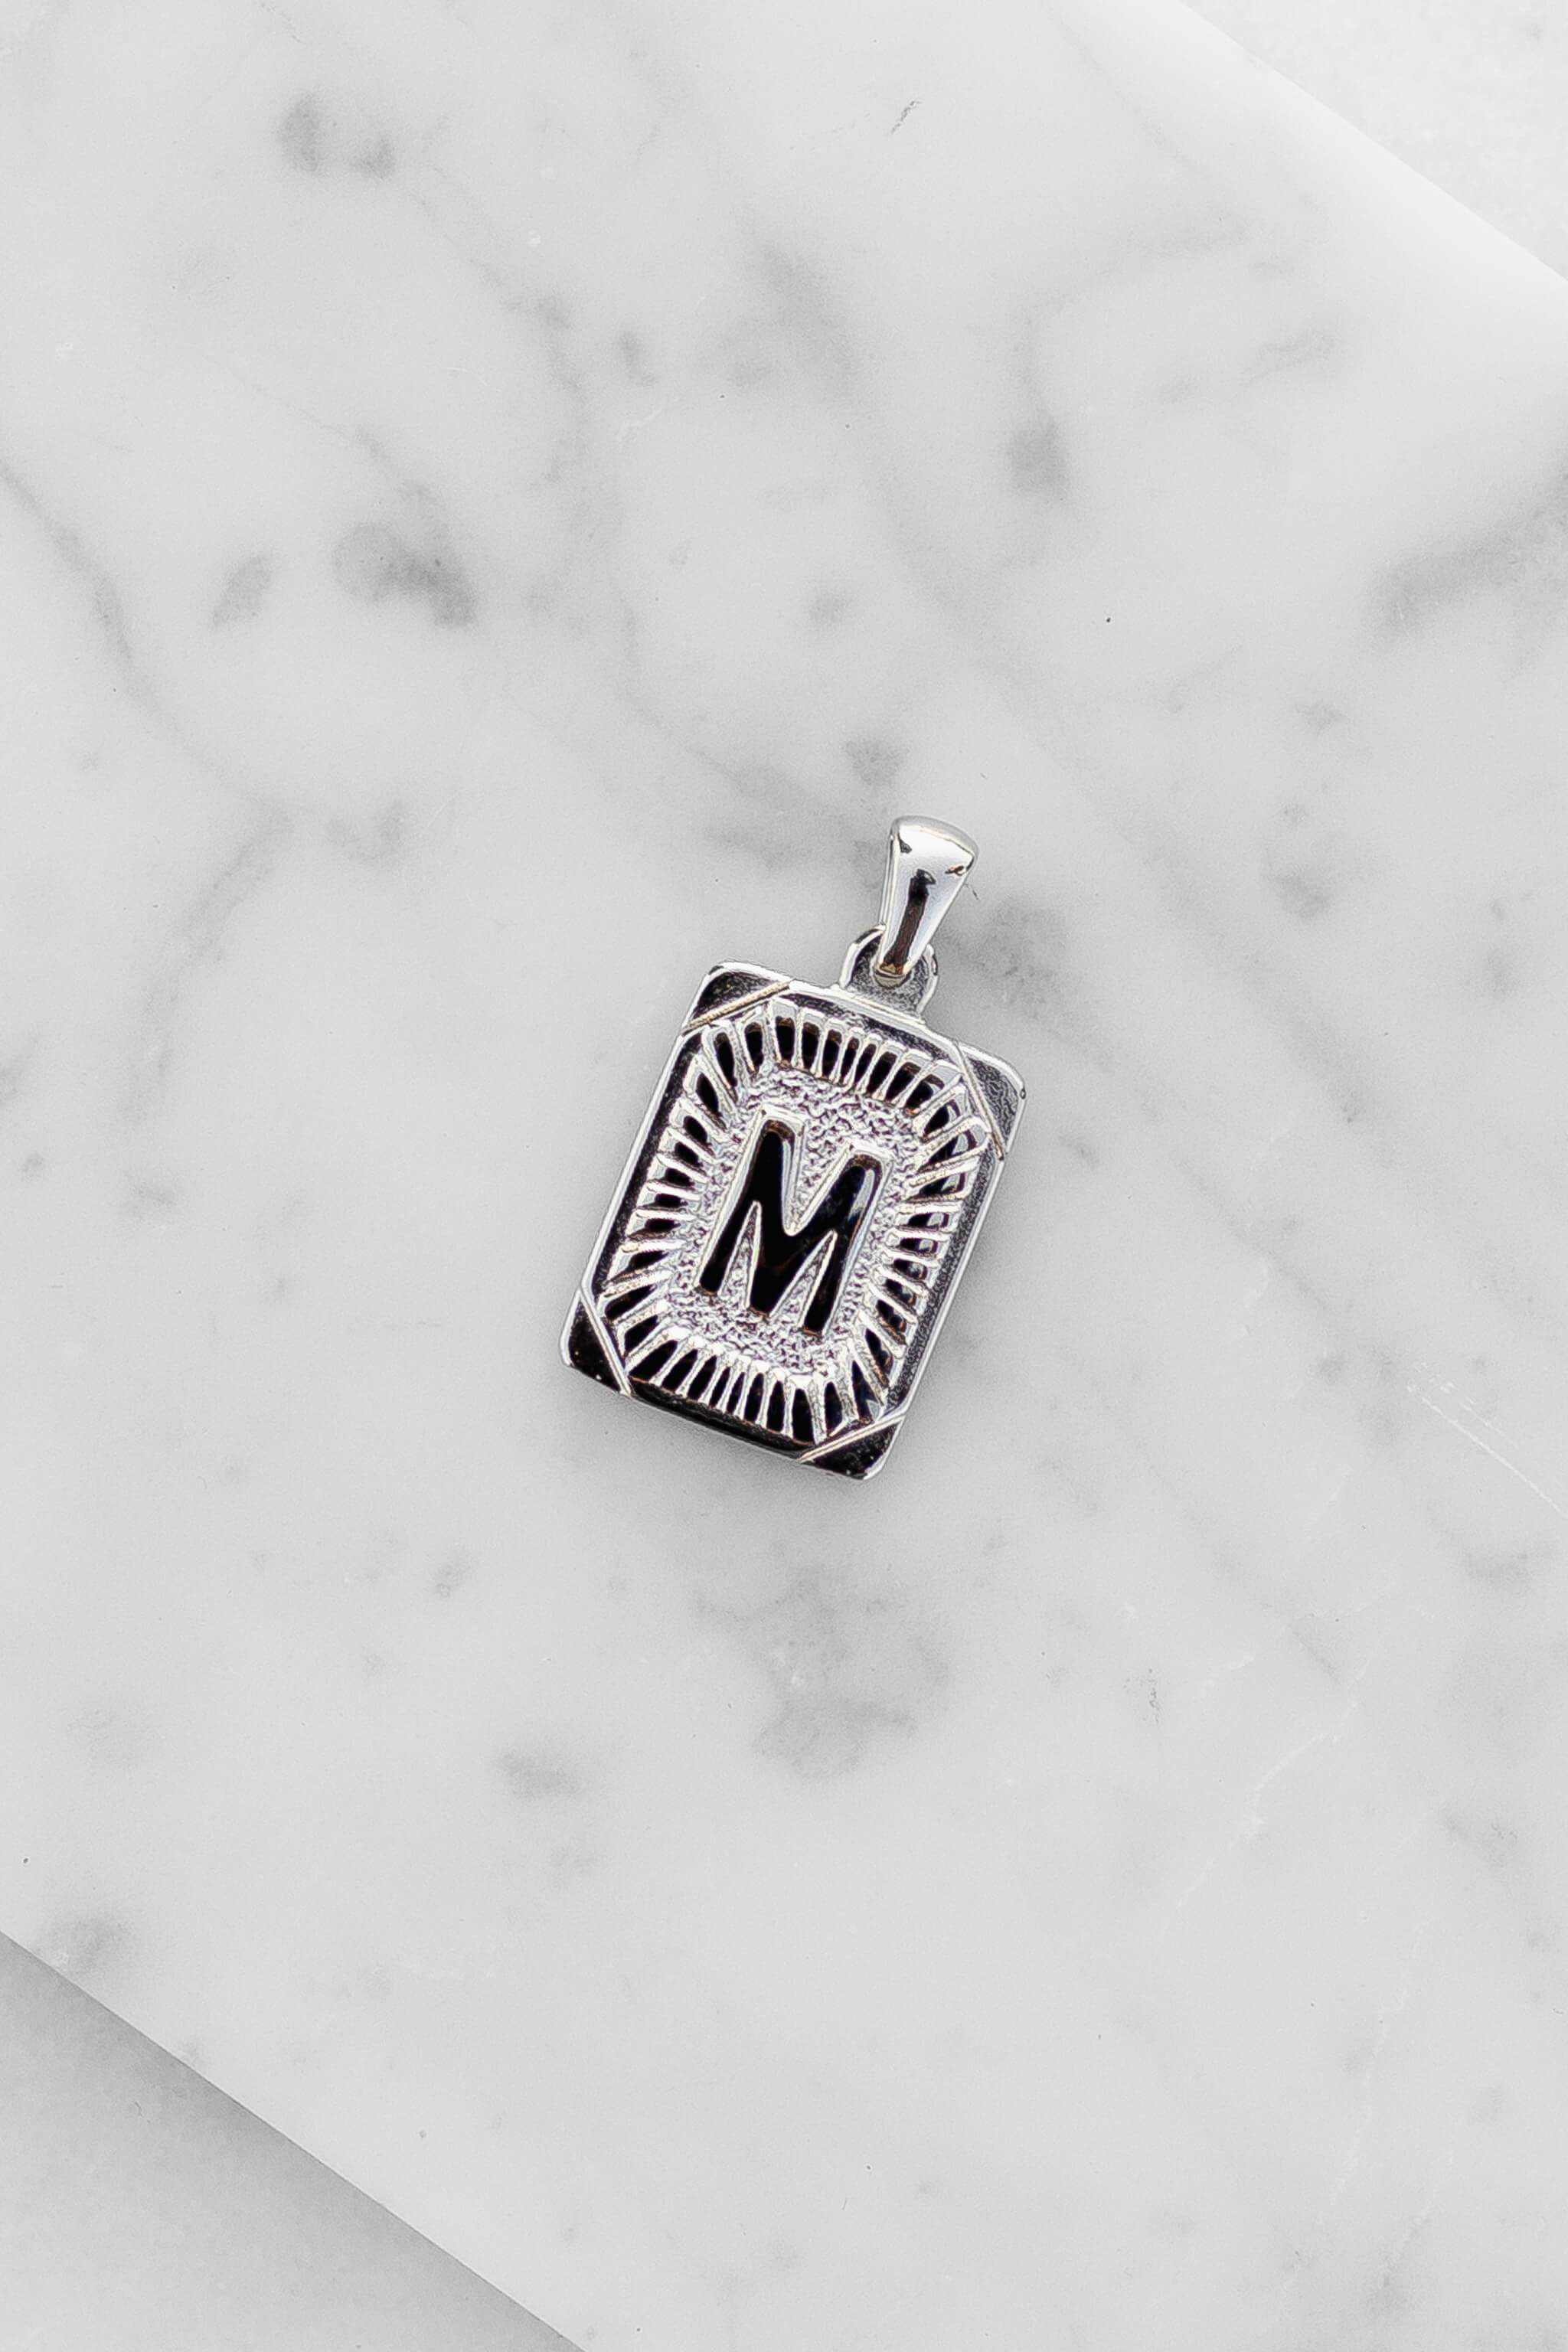 Silver Monogram Letter "M" Charm laying on a marble